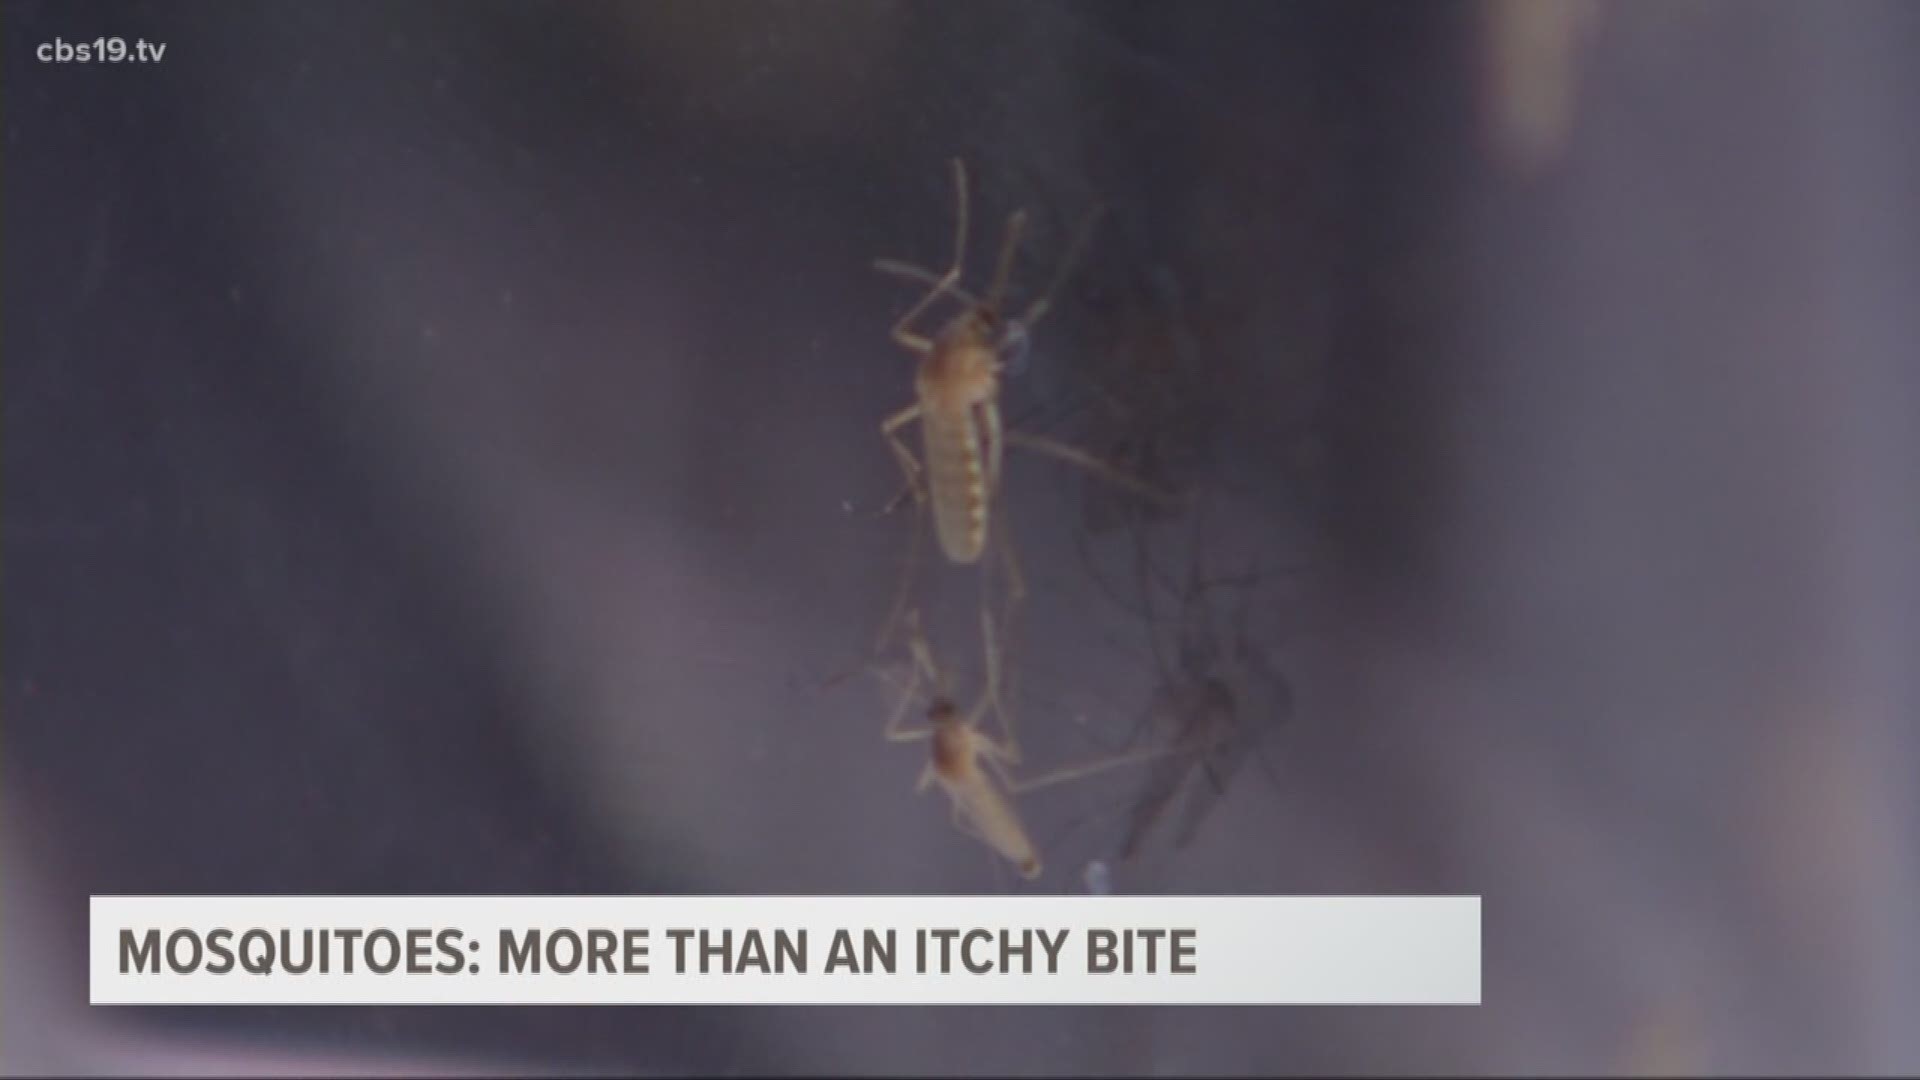 On top of their itchy bites, mosquitoes can carry deadly diseases.